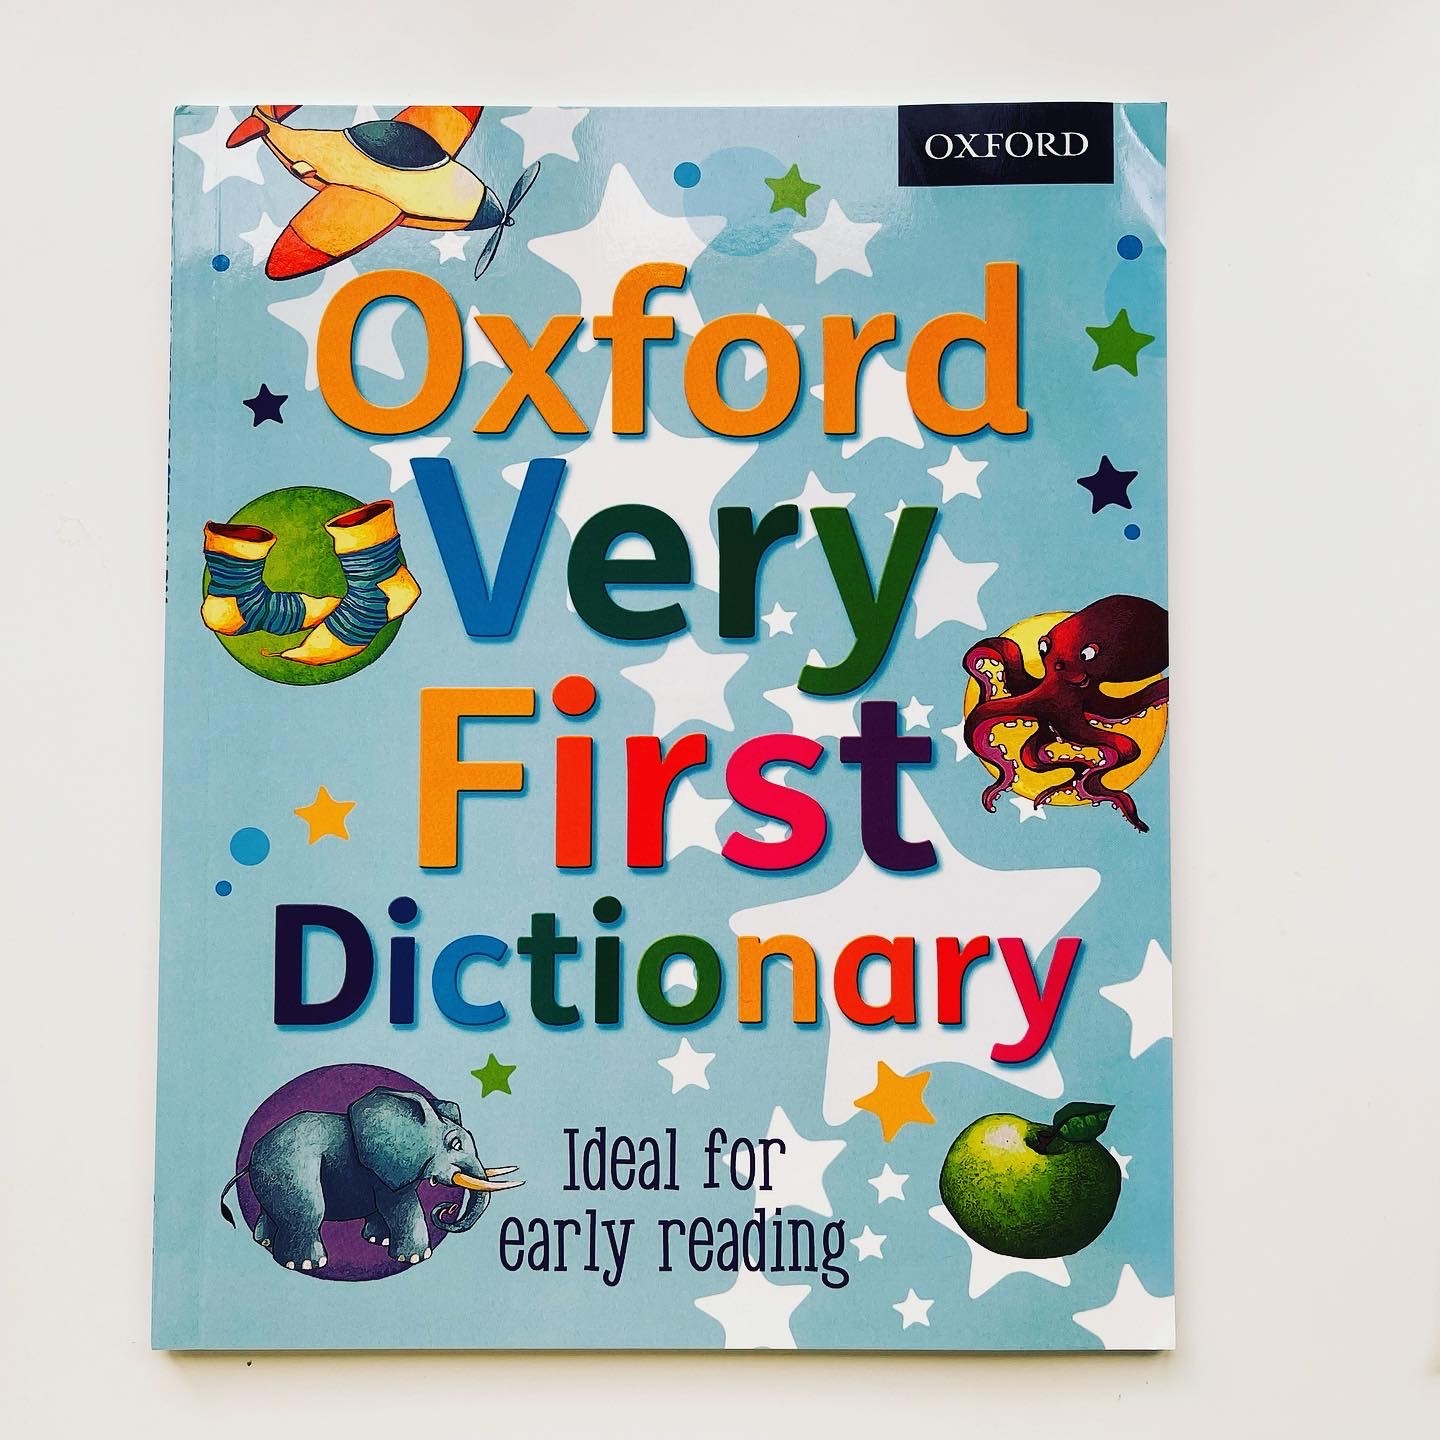 First dictionary. Oxford very first Dictionary.